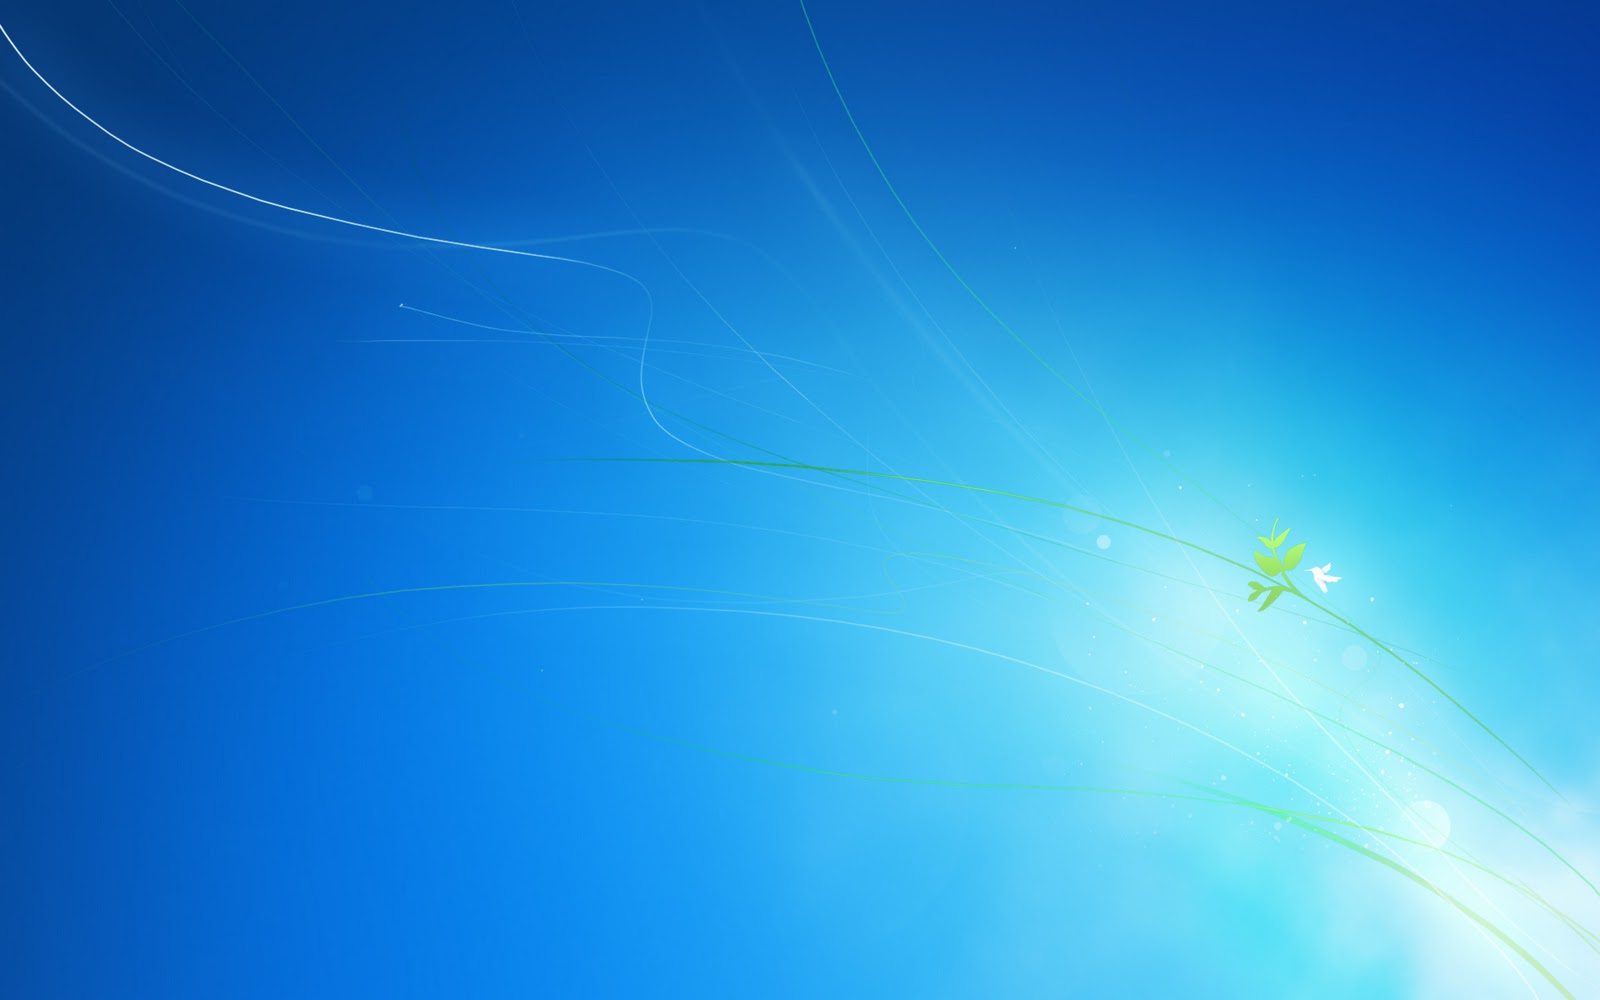 Windows 8 Wallpapers Pack